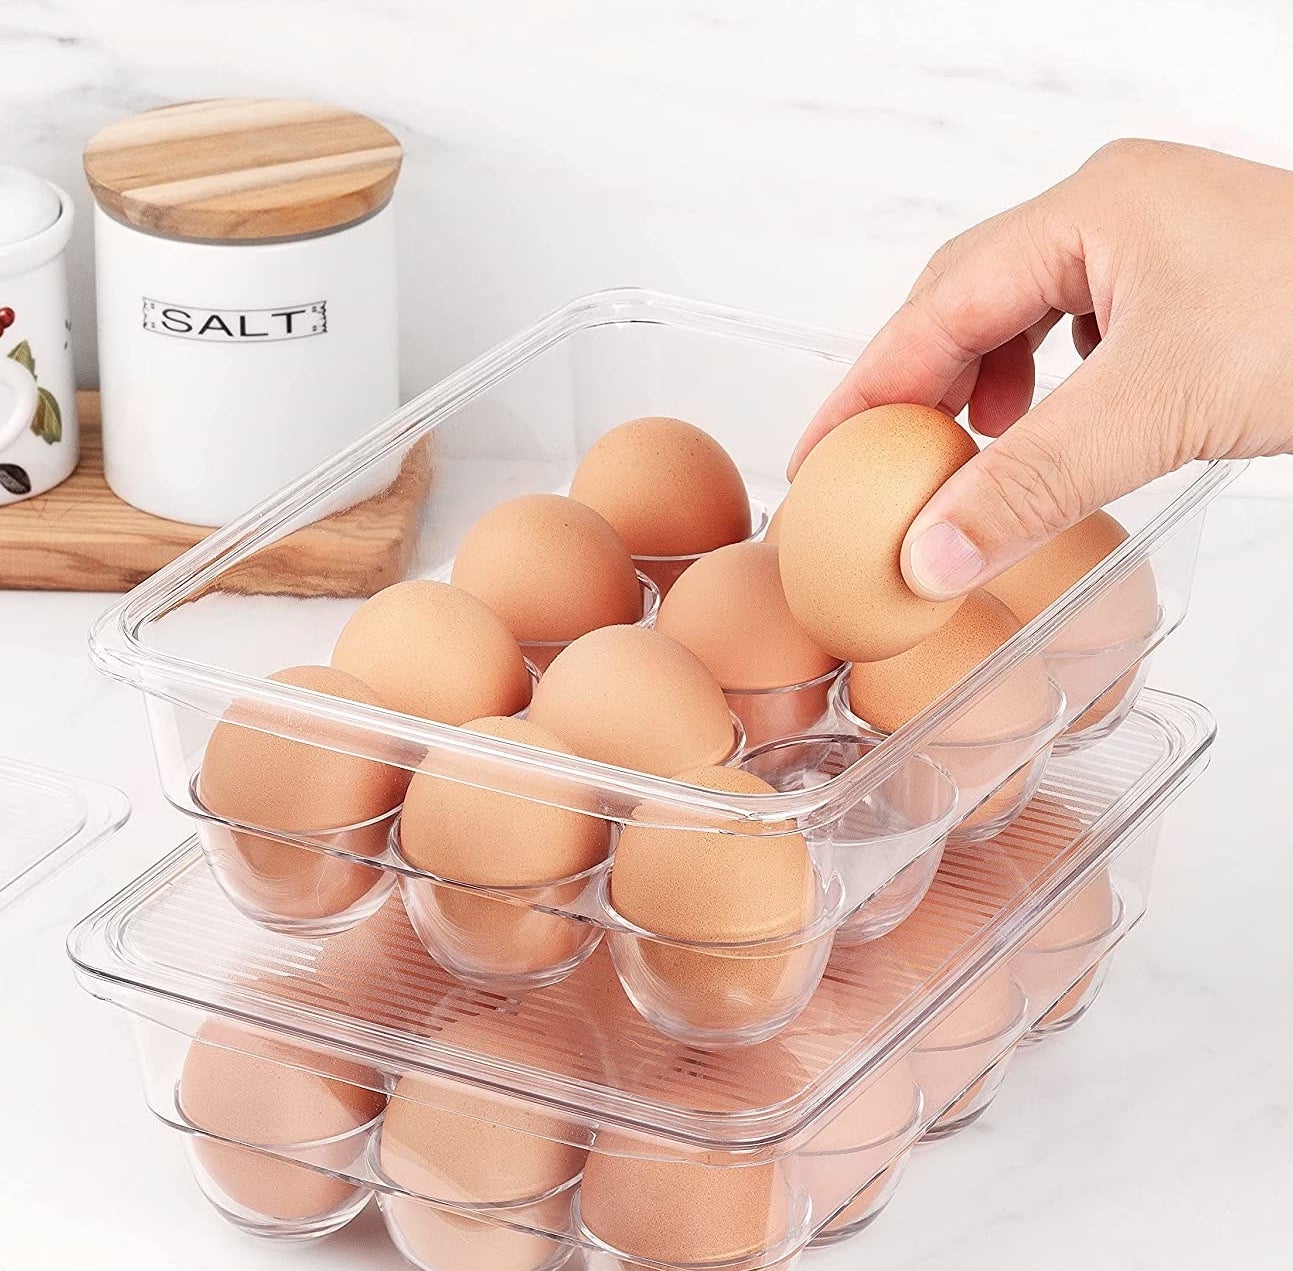 A person putting an egg into an almost-full egg container